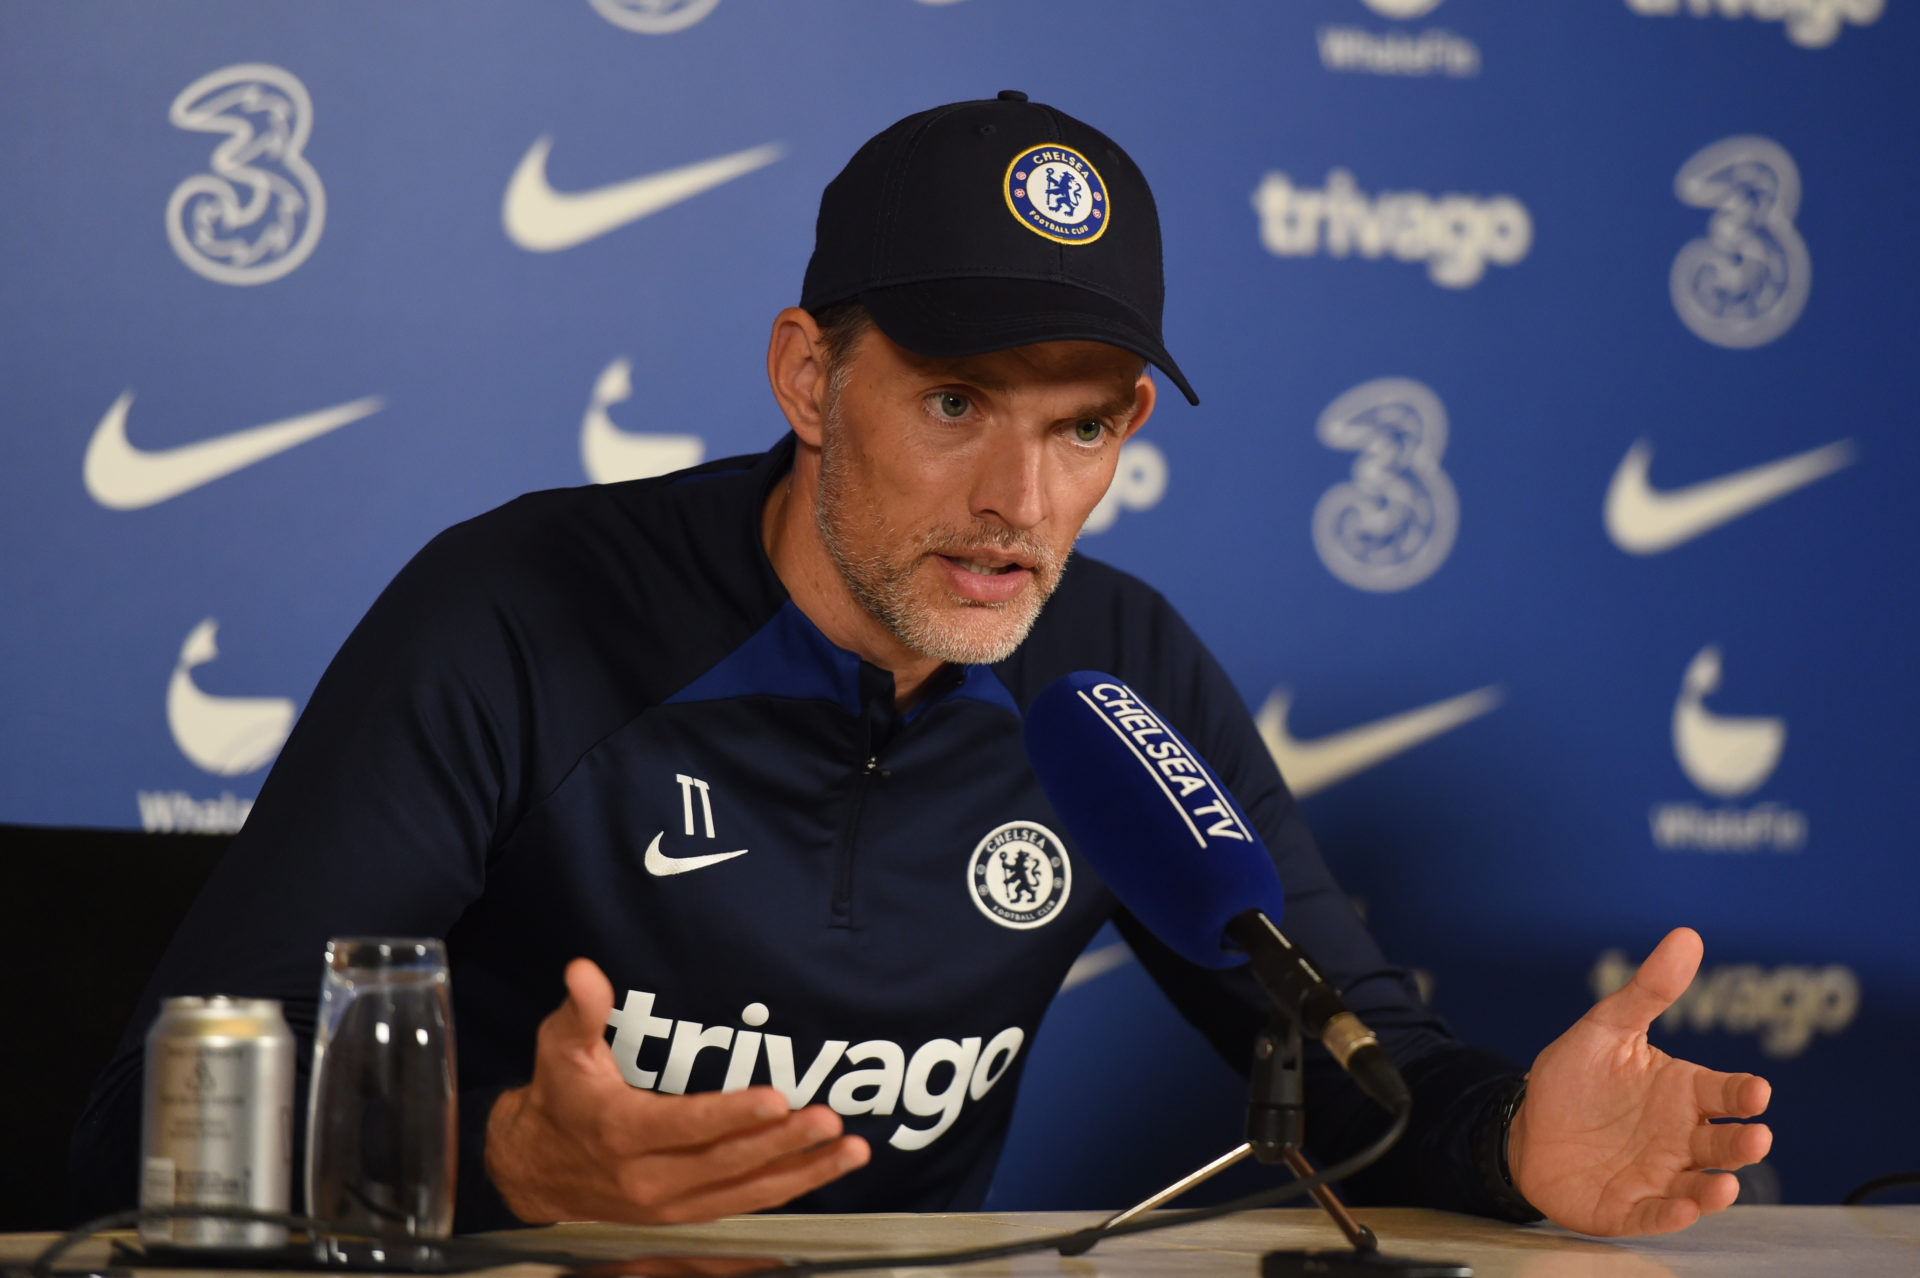 Chelsea Training Session & Press Conference